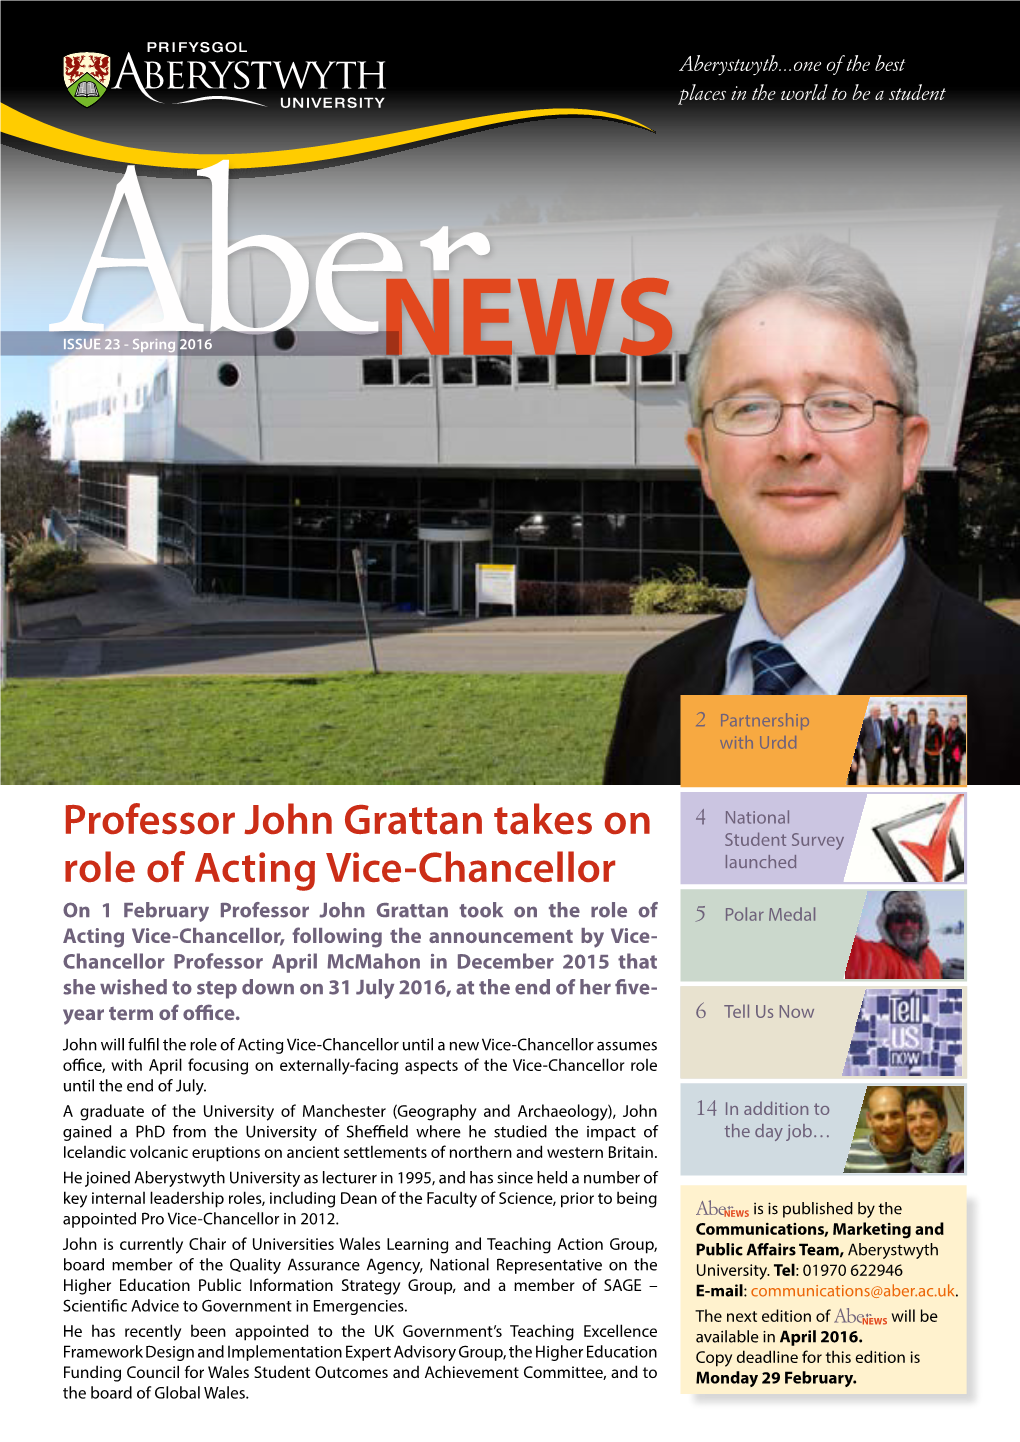 Professor John Grattan Takes on Role of Acting Vice-Chancellor